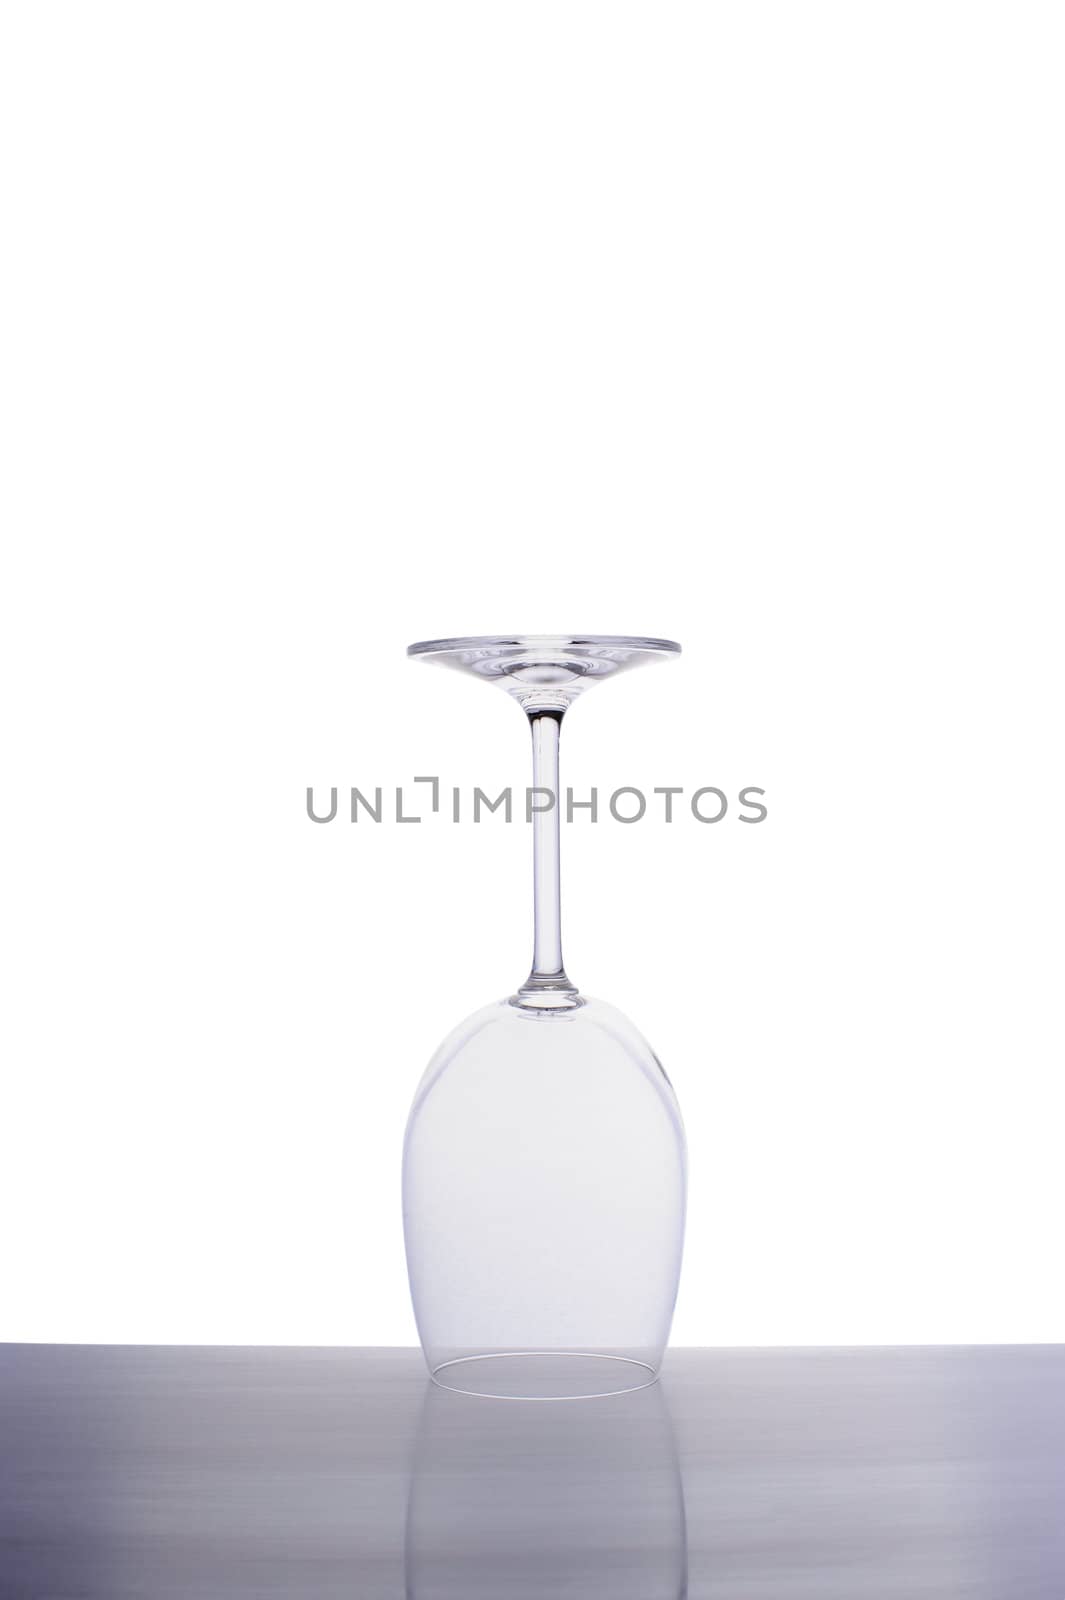 Inverted empty wine glass isolated on white background